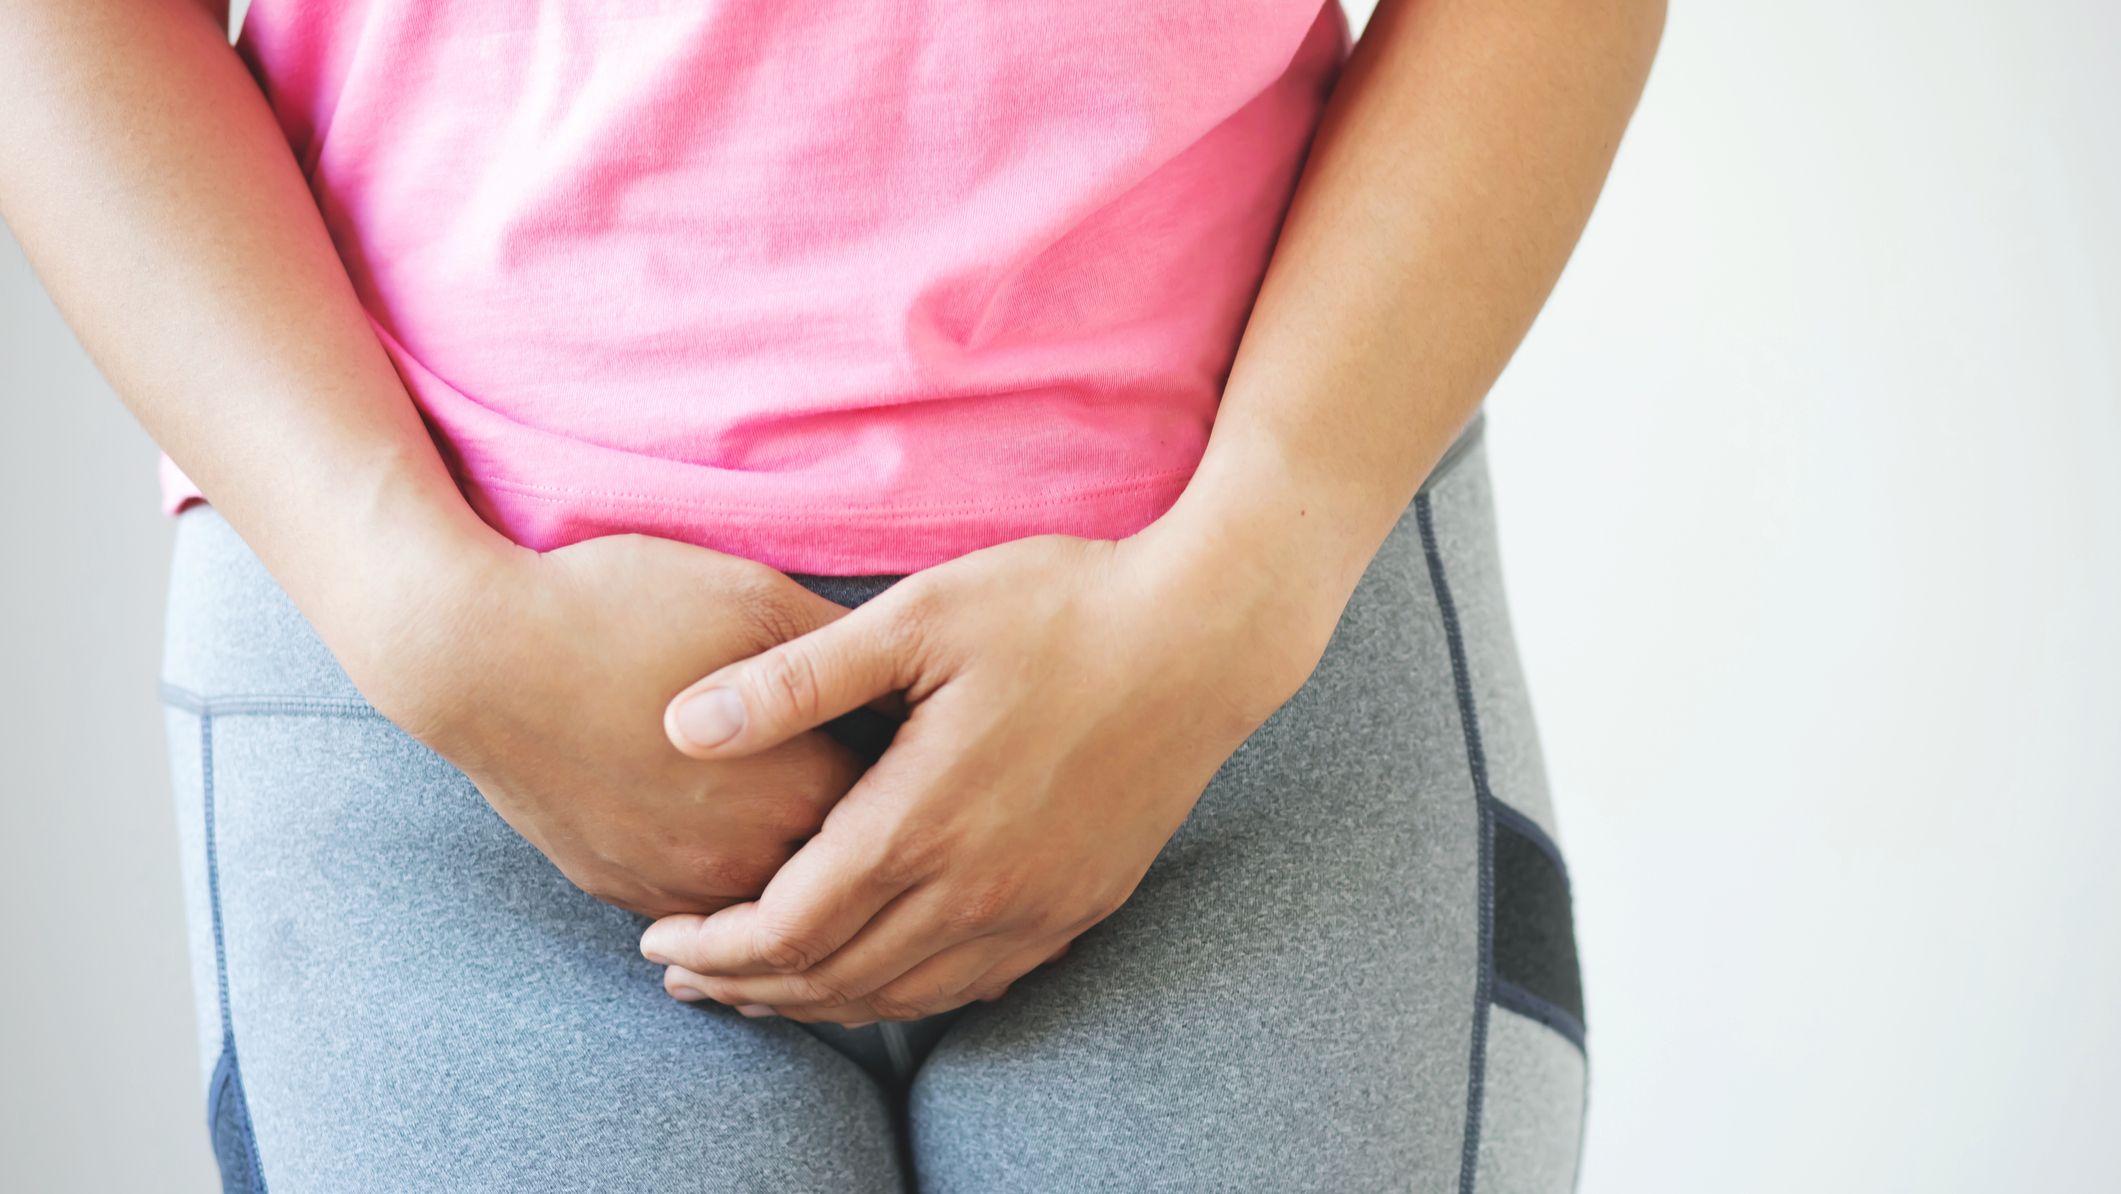 Period rash? Try these 3 home remedies for instant relief